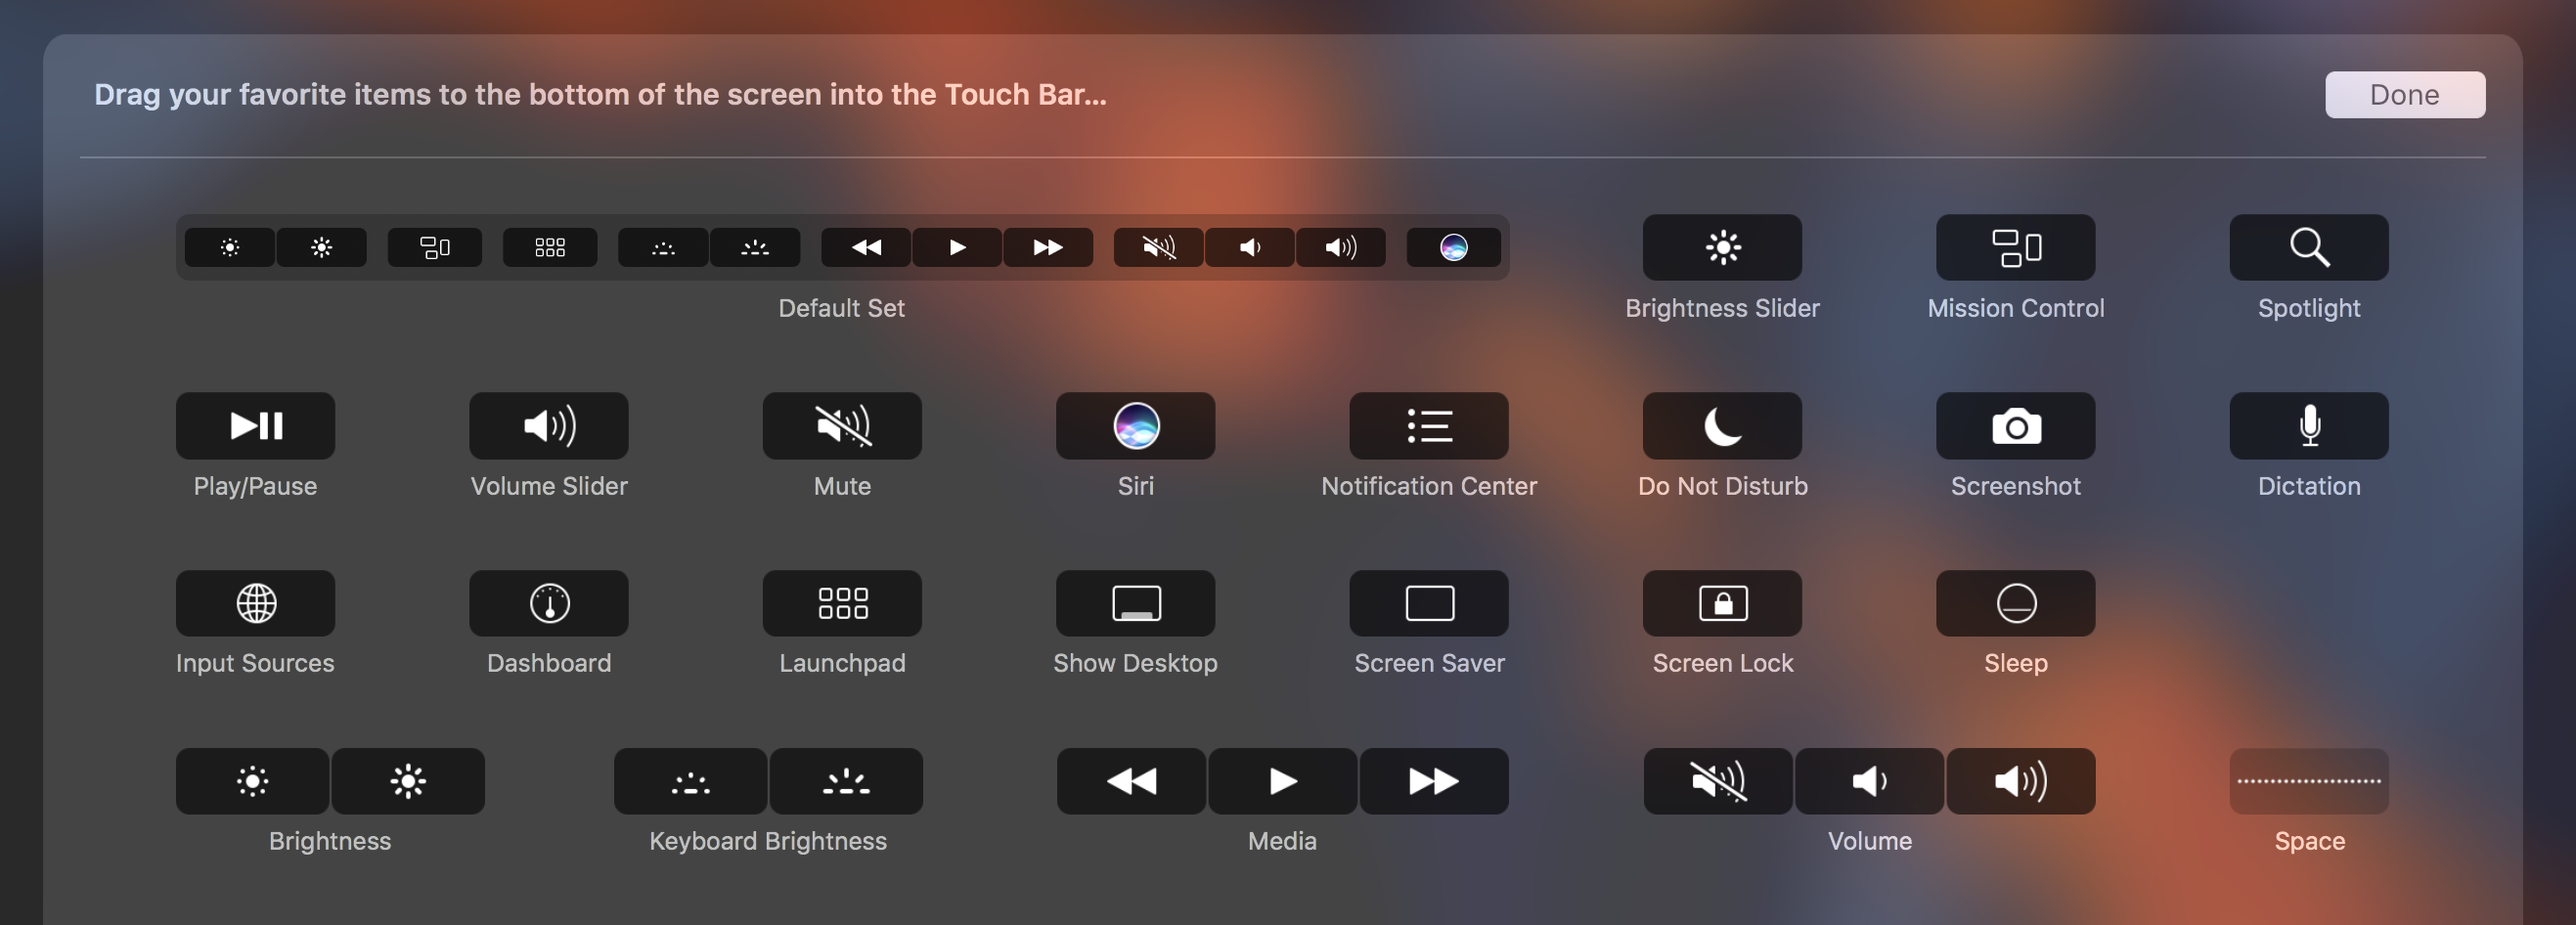 customize expanded control strip in touch bar